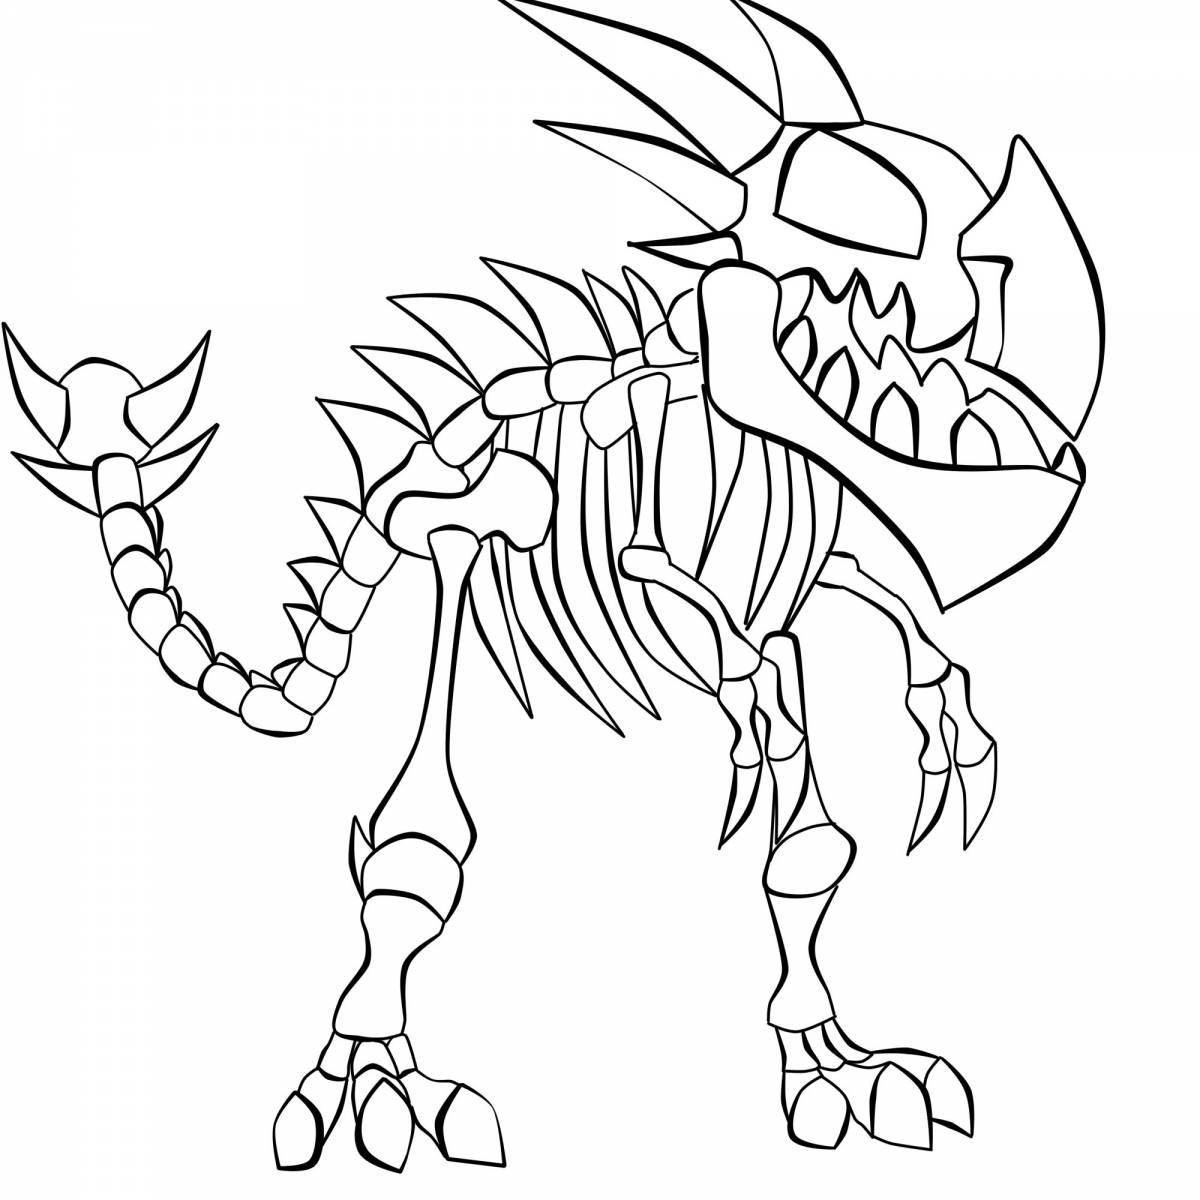 Horrible monsters from the door coloring pages